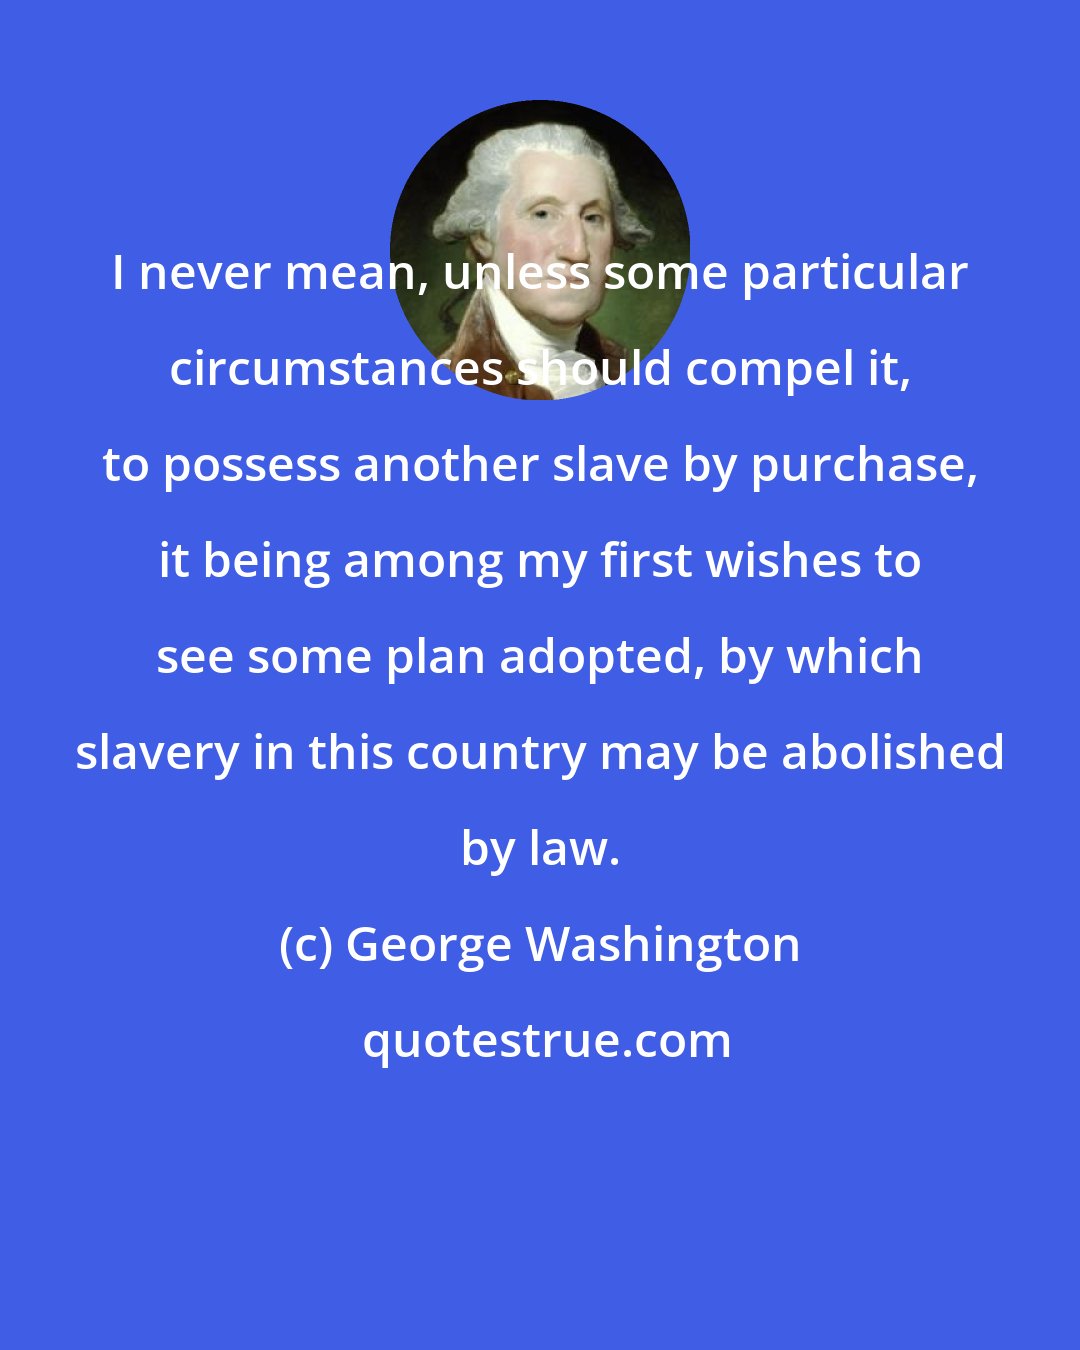 George Washington: I never mean, unless some particular circumstances should compel it, to possess another slave by purchase, it being among my first wishes to see some plan adopted, by which slavery in this country may be abolished by law.